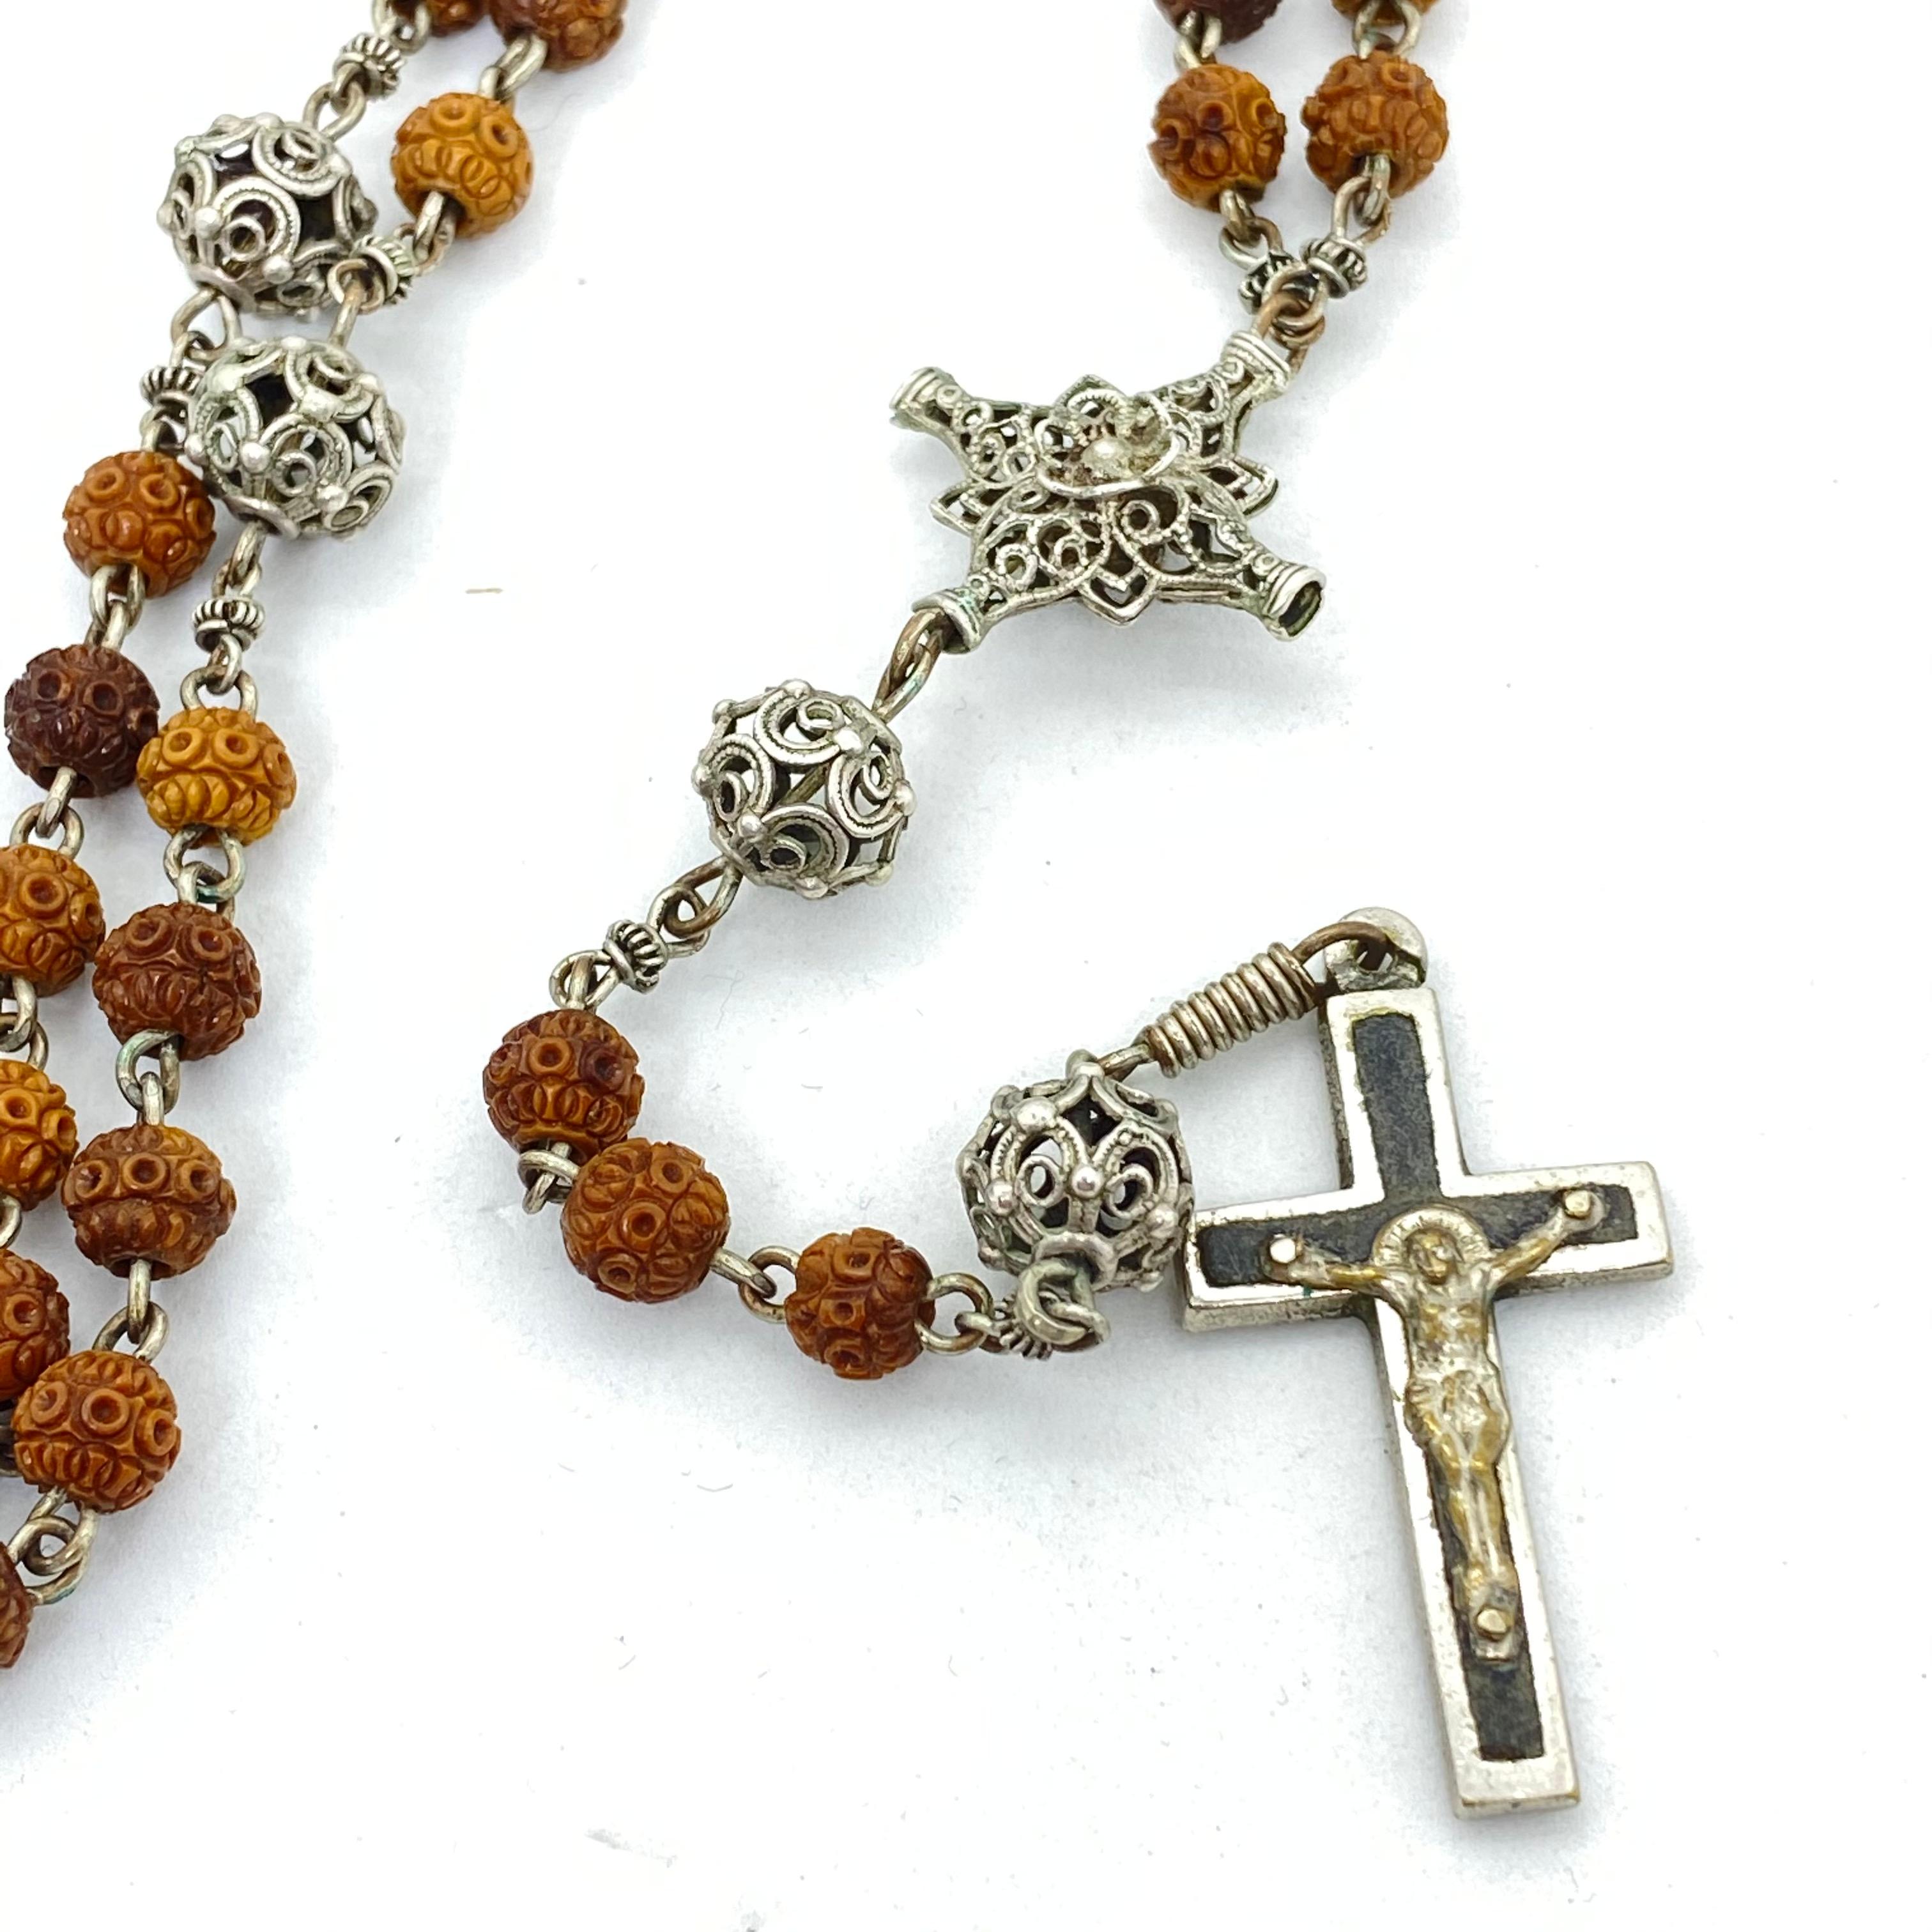 Early 20th Century Antique Catholic Rosary on a Crucifix Stand / Holder 1910s or Older, Germany